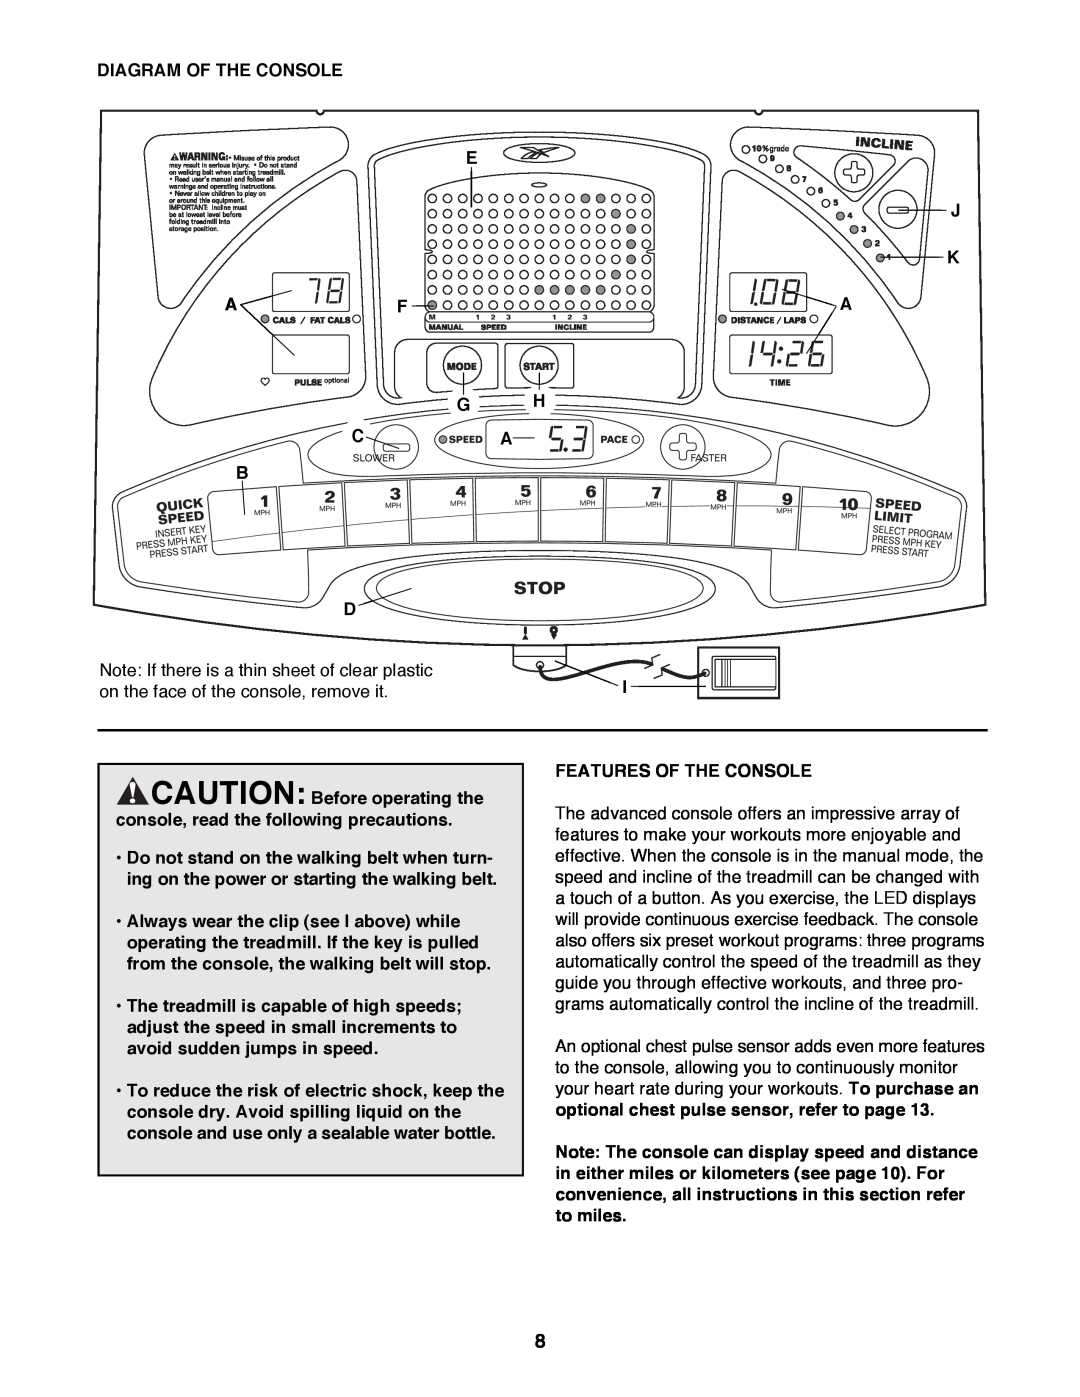 Reebok Fitness RBTL11981 manual Diagram Of The Console E J K, G H Ca B, Features Of The Console 